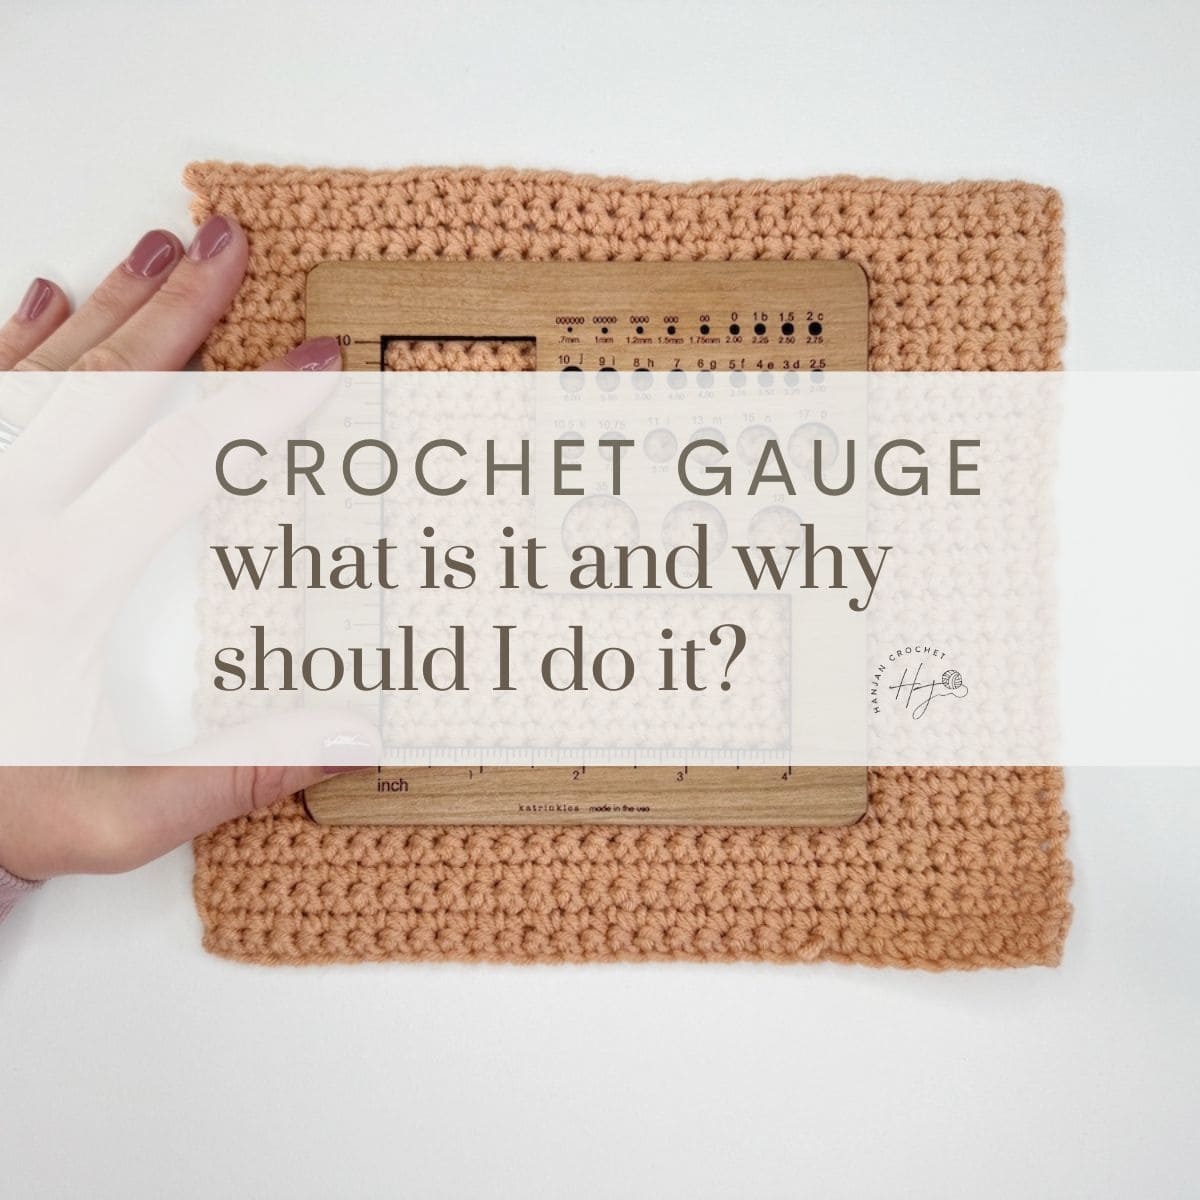 How to Make a Crochet Gauge Swatch, and Why it’s So Important